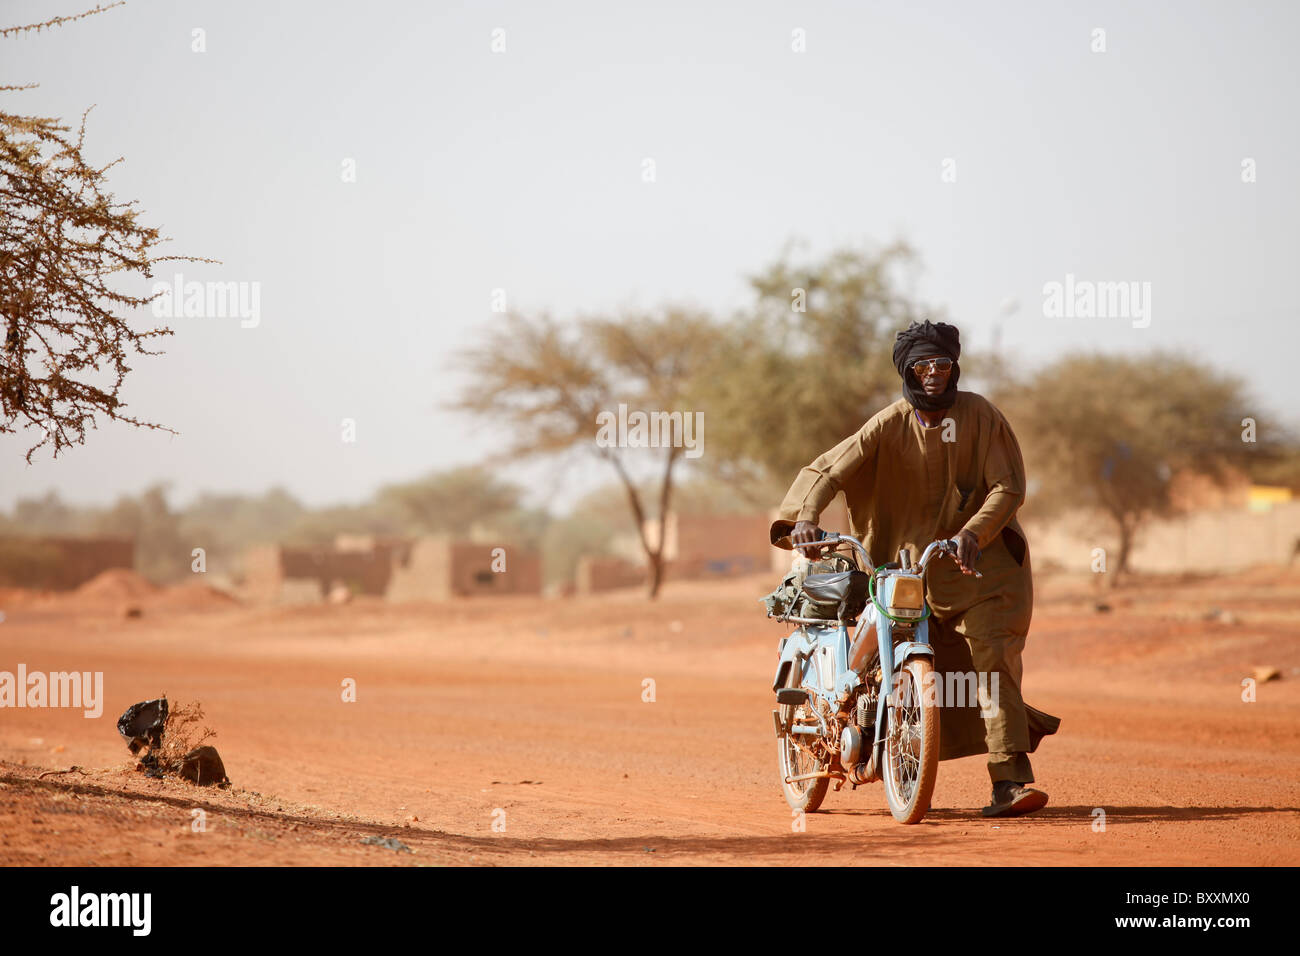 Mopeds are increasing rapidly as a form of transport throughout the region.  Djibo, Burkina Faso. Stock Photo